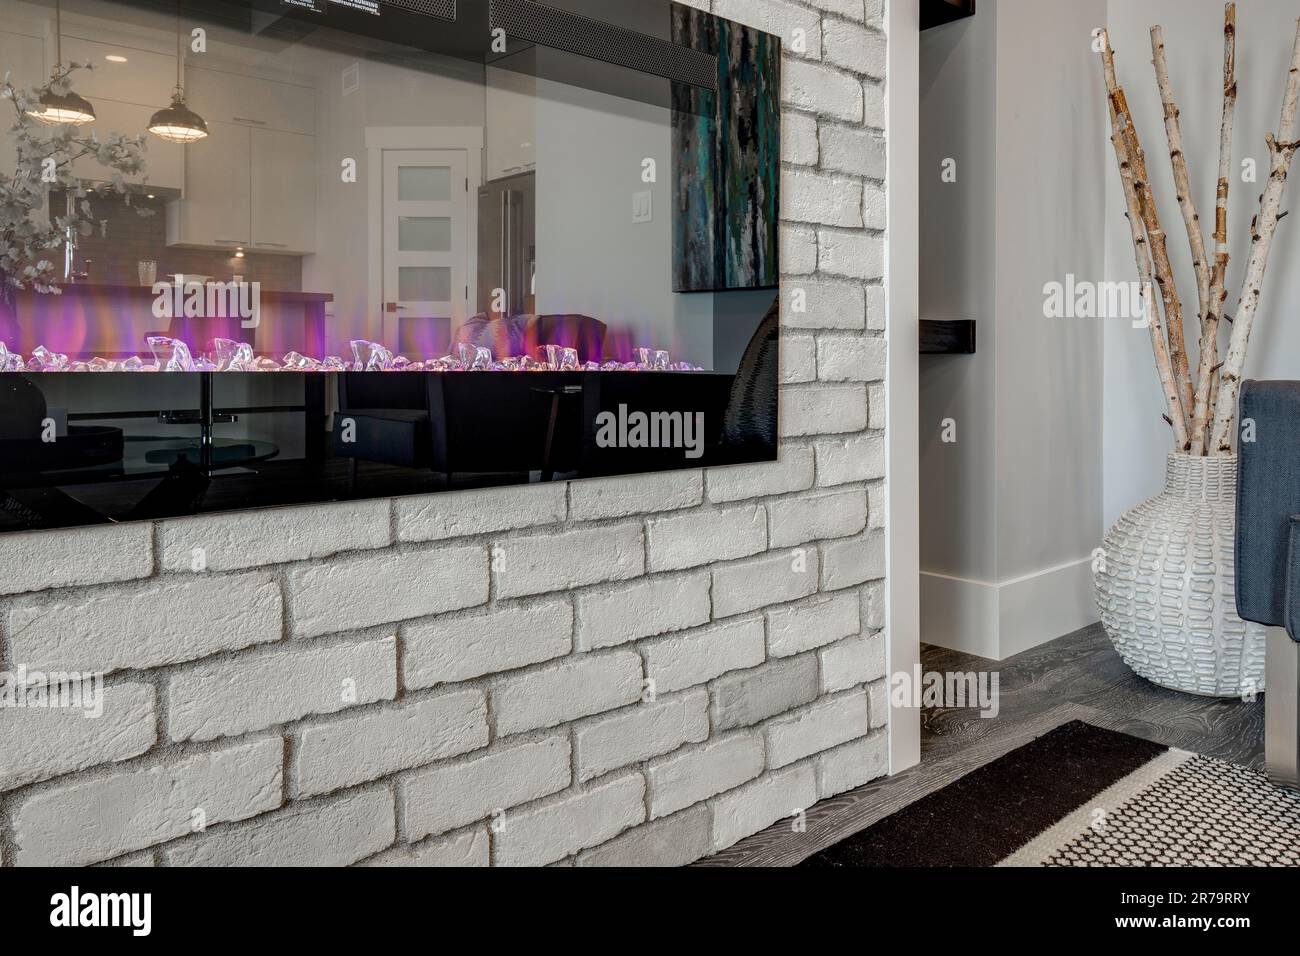 A modern interior design with an electronic fireplace in a white brick wall Stock Photo